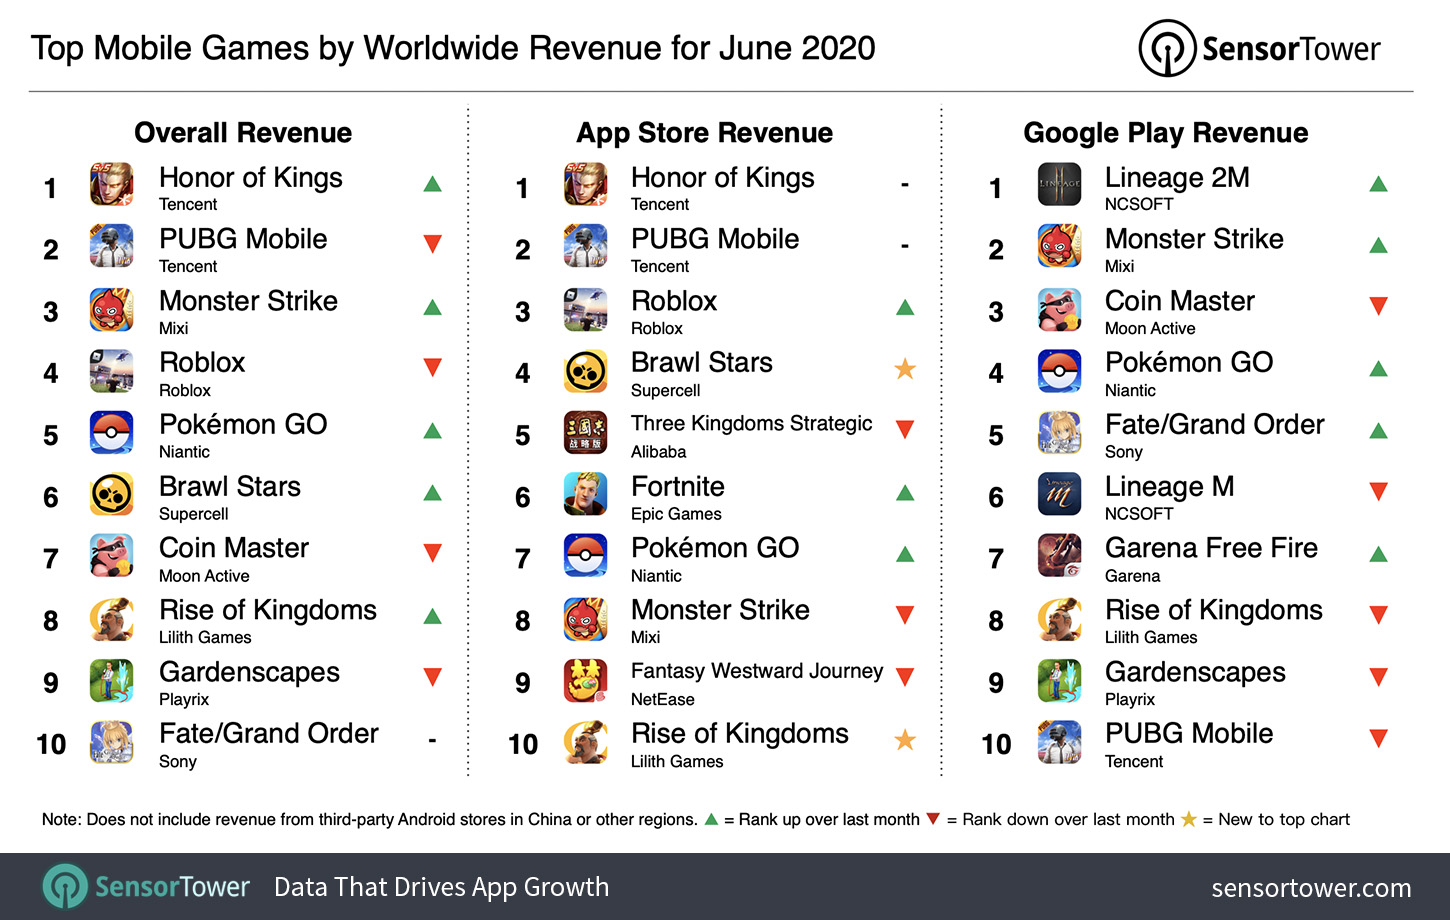 “Top Grossing Mobile Games Worldwide for June 2020